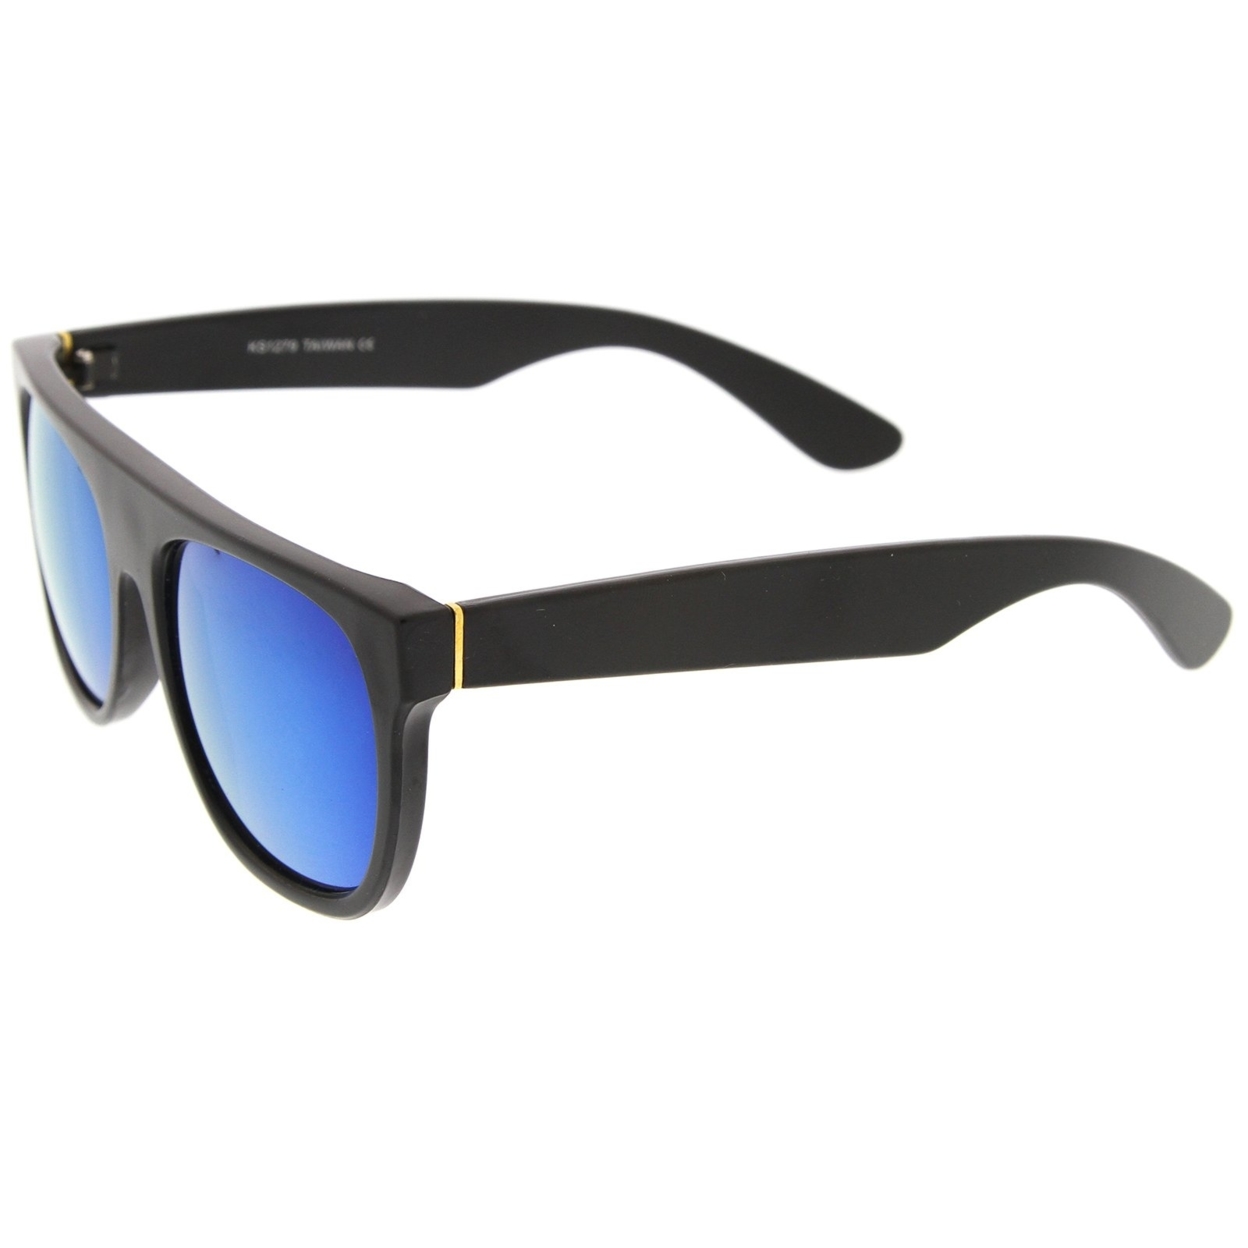 Modern Super Flat-Top Wide Temple Colored Mirror Lens Horn Rimmed Sunglasses 55mm - Matte Black / Yellow Mirror